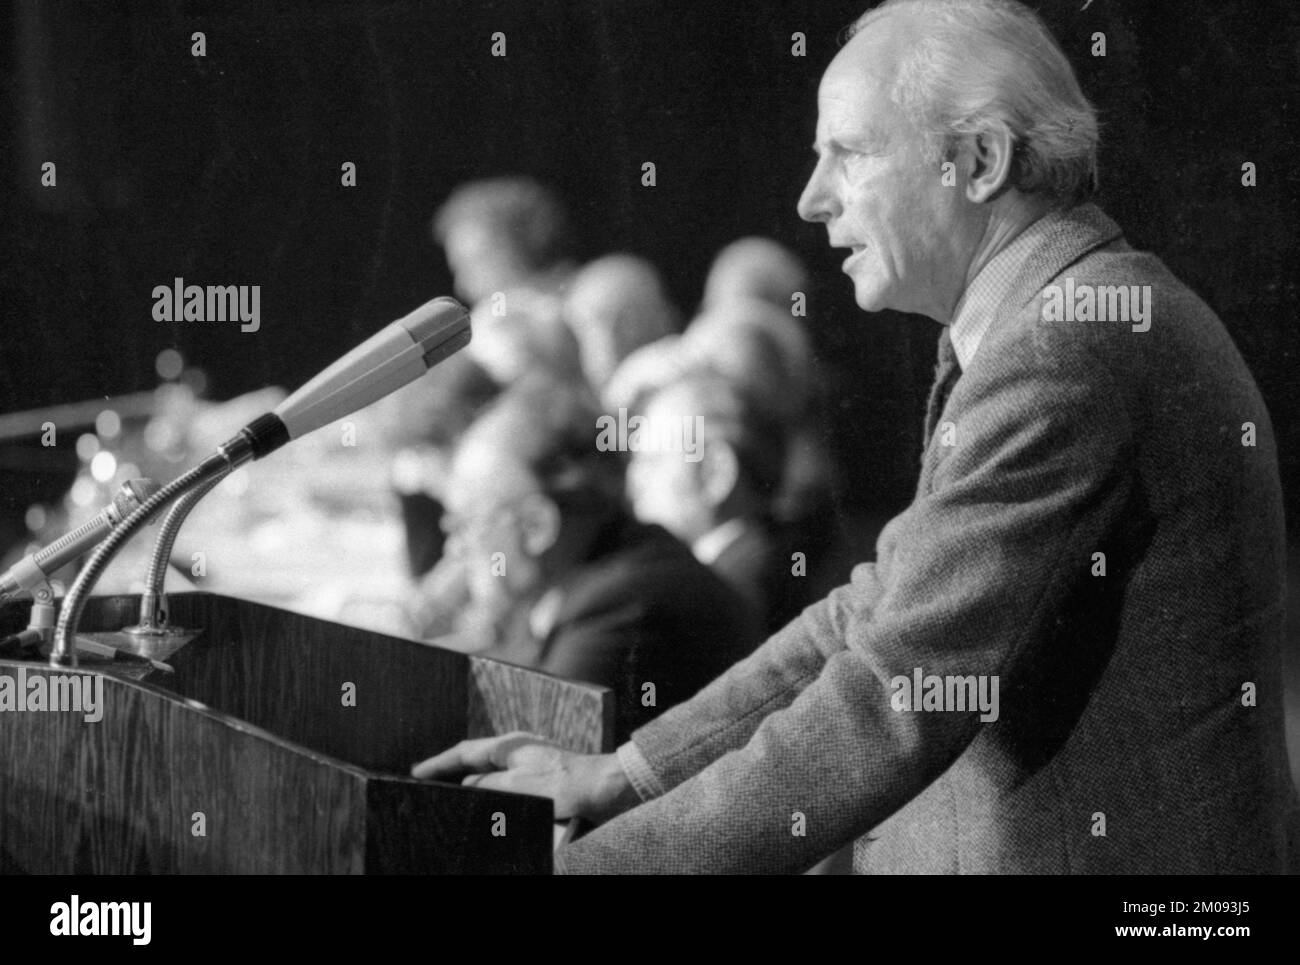 The rejection of the NATO decision was the central theme of this conference, from which the Krefeld Appeal emerged on 16 November 1980 in Krefeld. Ger Stock Photo